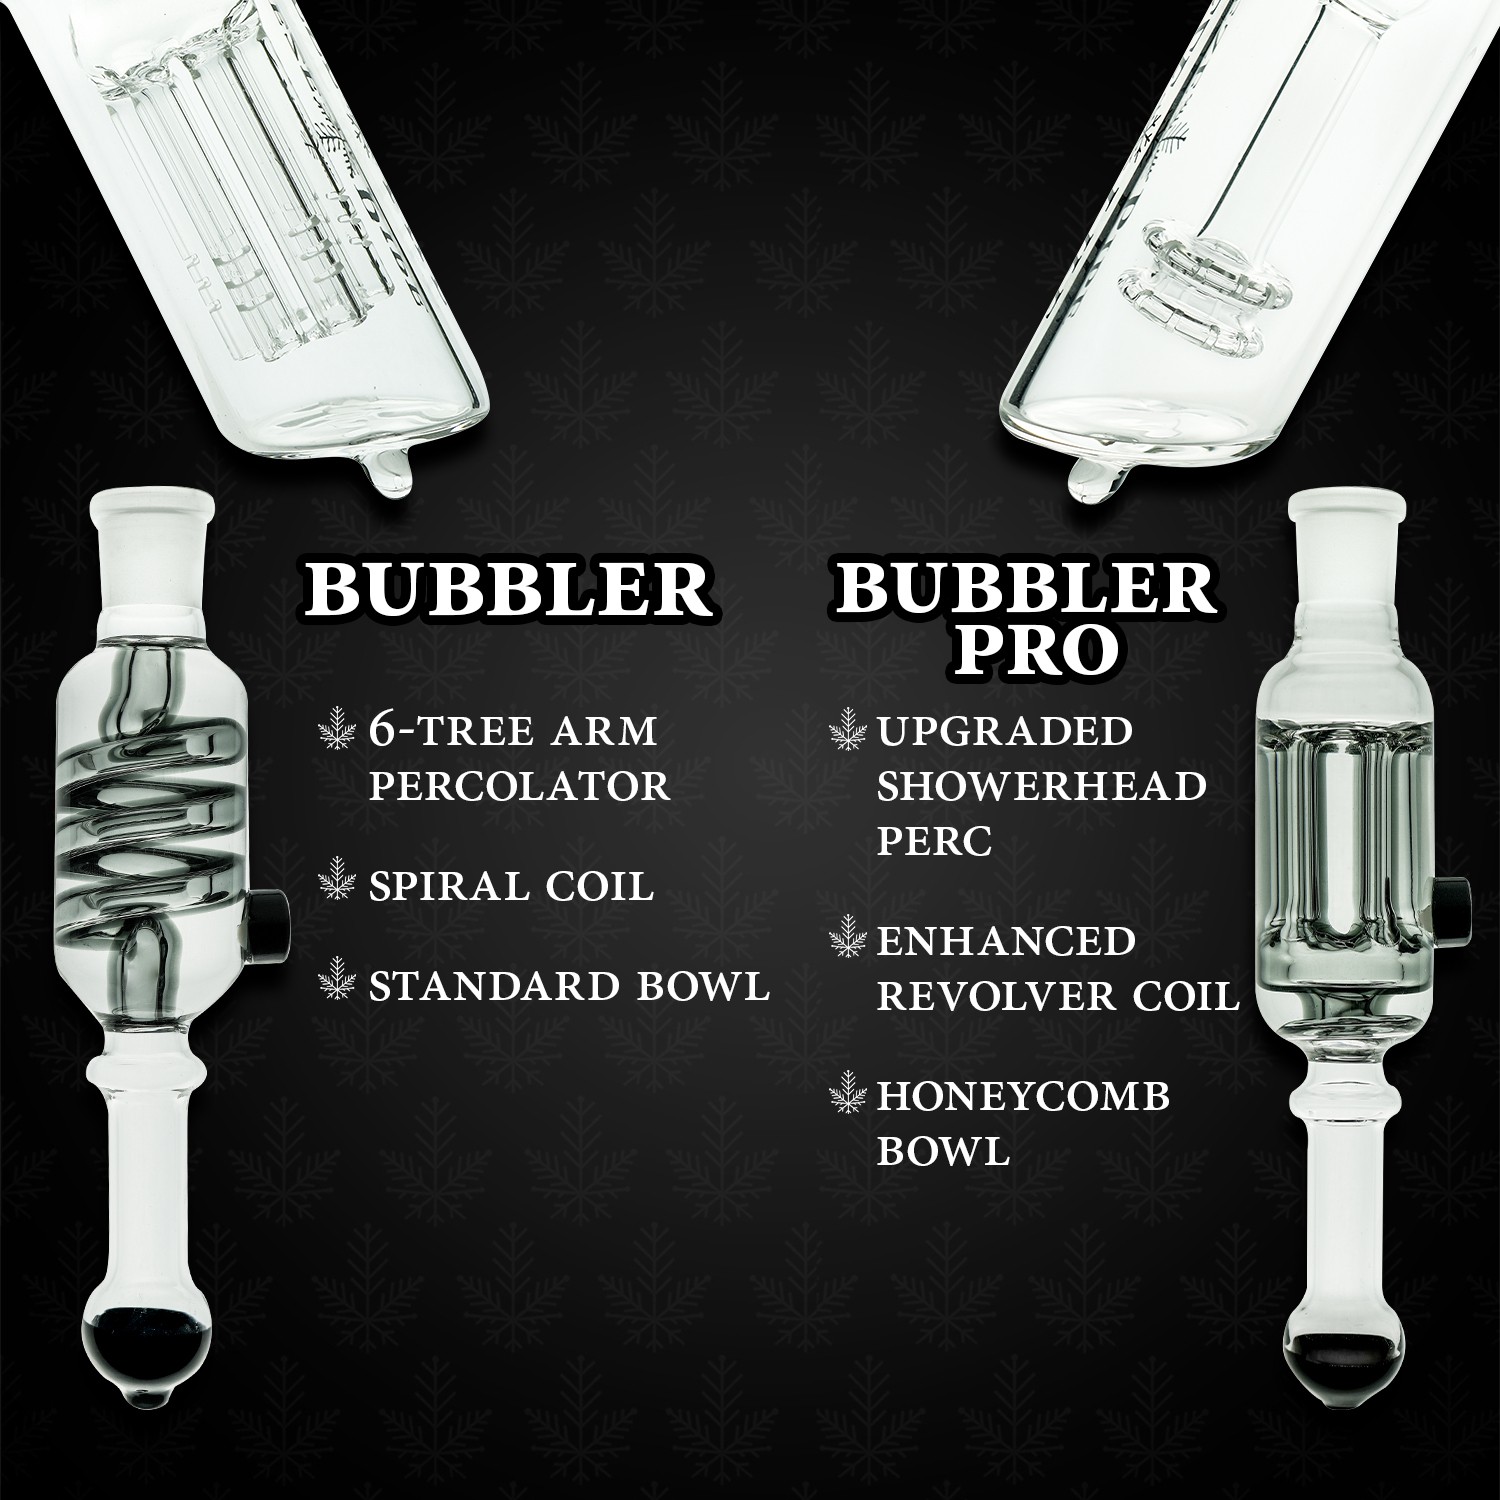 infographic comparing bubblers